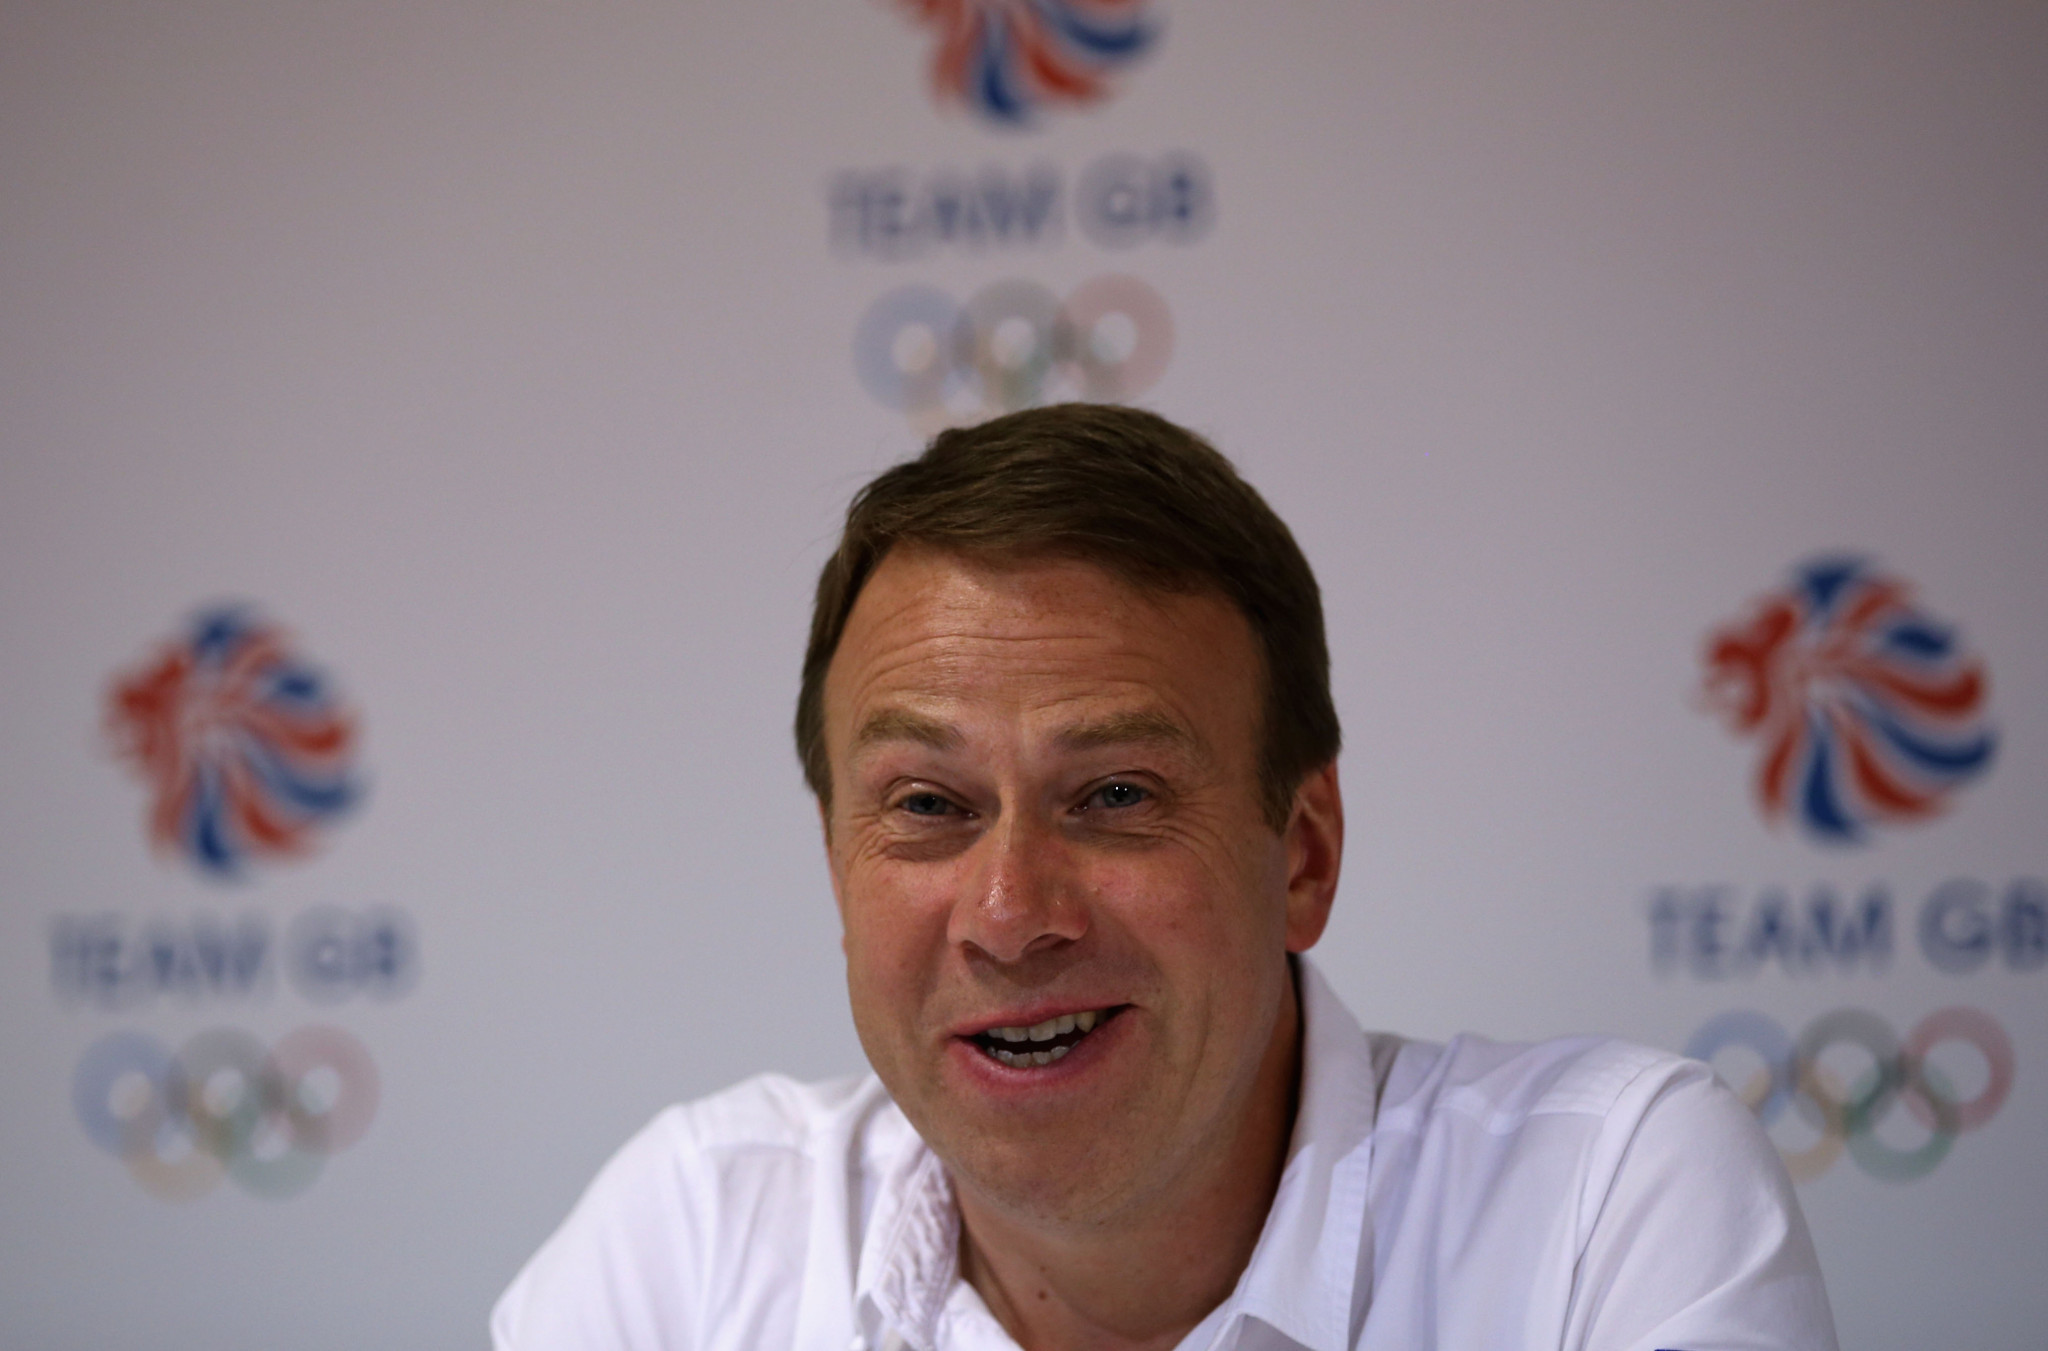 Exclusive: Hunt appears to have been paid over £250,000 in last year at World Sailing